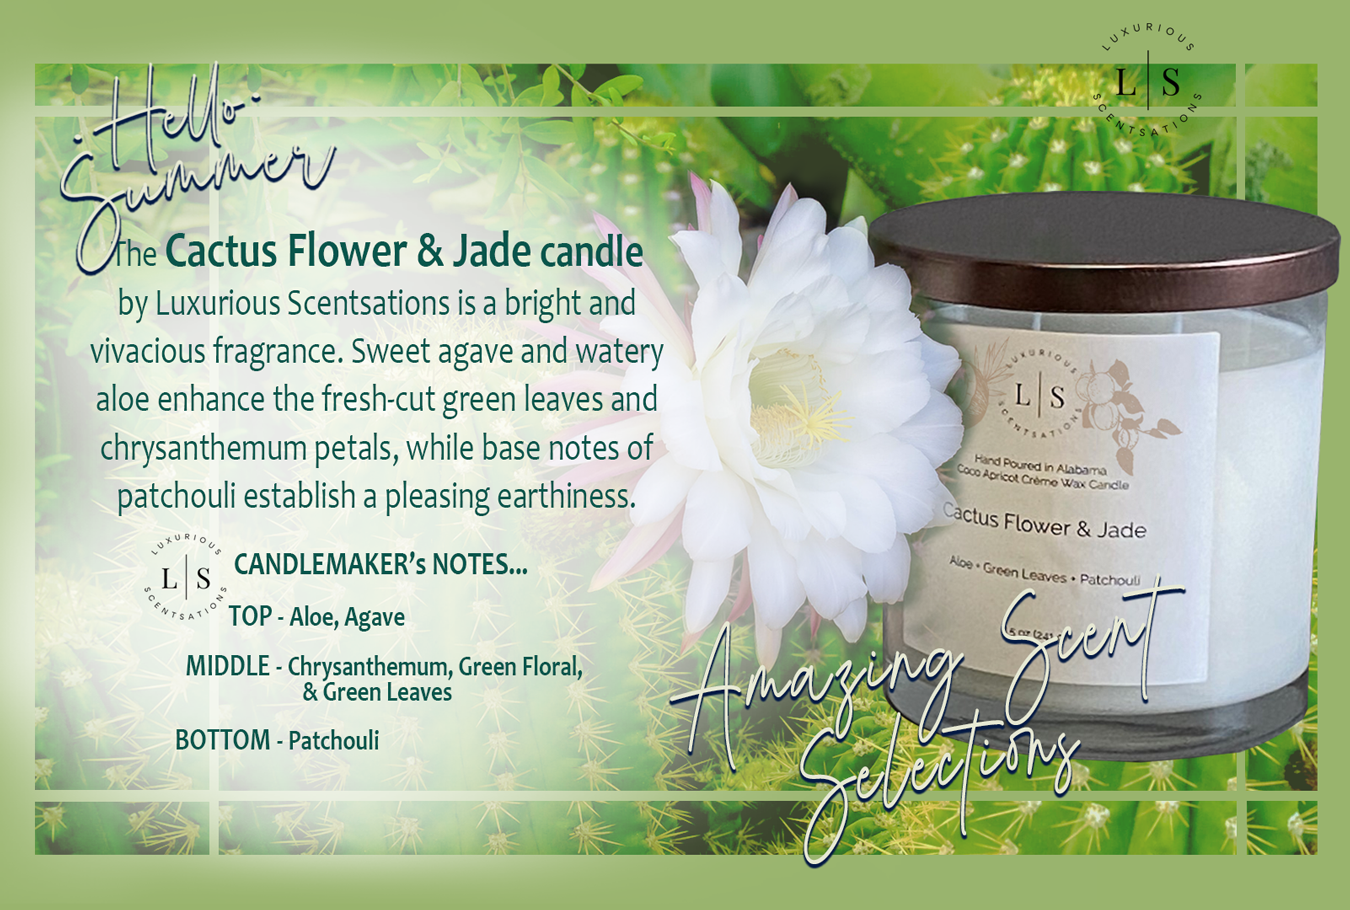 Image of the Cactus Flower and Jade candle by Luxurious Scentsations with a fragrance description and candlemaker's top middle bottom notes